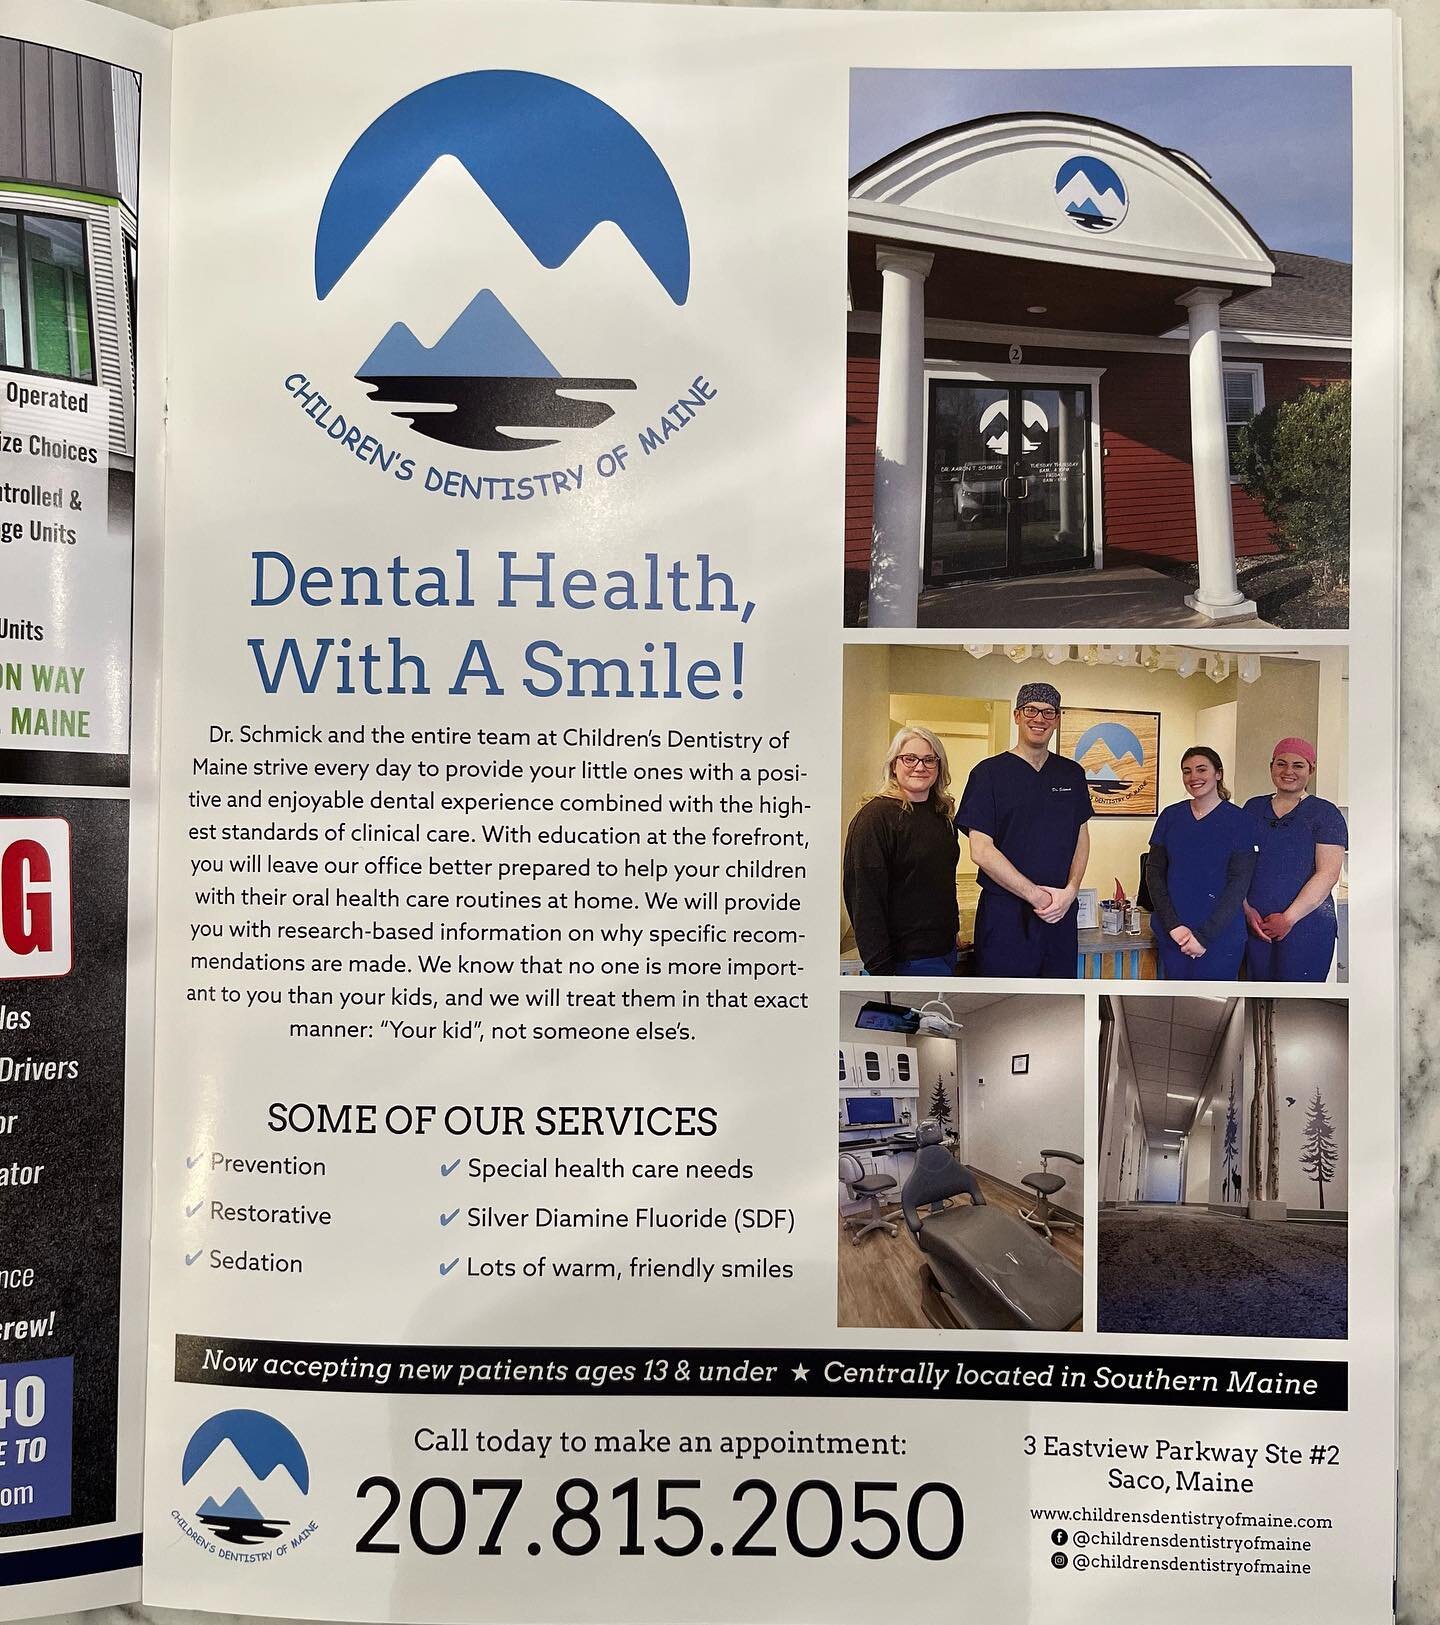 Check out our ad in the spring Scarborough edition of @keepitlocalmaine! Also thanks to Kim for coming to check out the office and provide us with a great lunch spread from @amatos_official 

#childrensdentistryofmaine #pediatricdentistry #saco #star